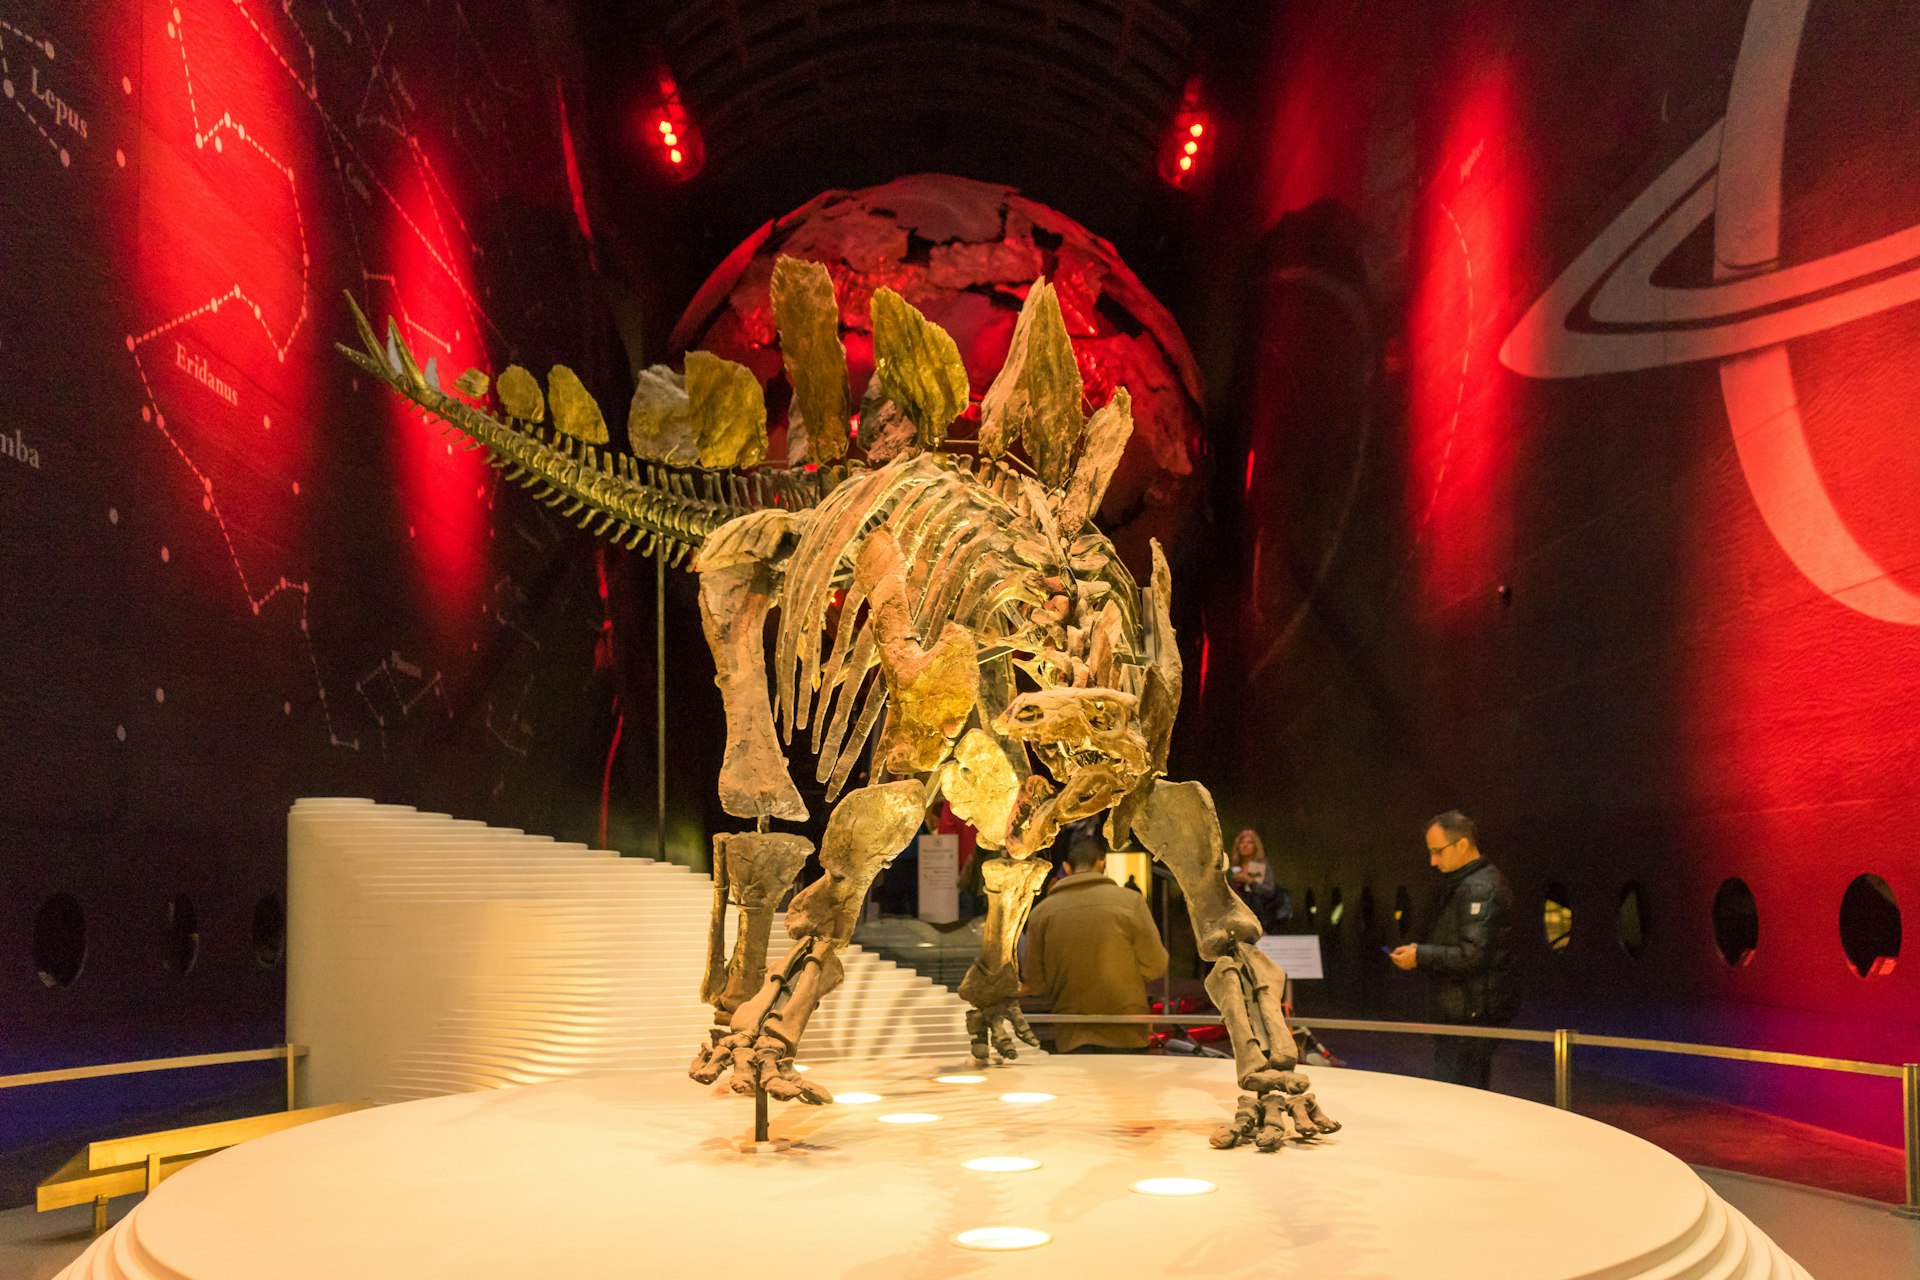 A stegosaurus skeleton stand in an exhibition as tourists walk around it